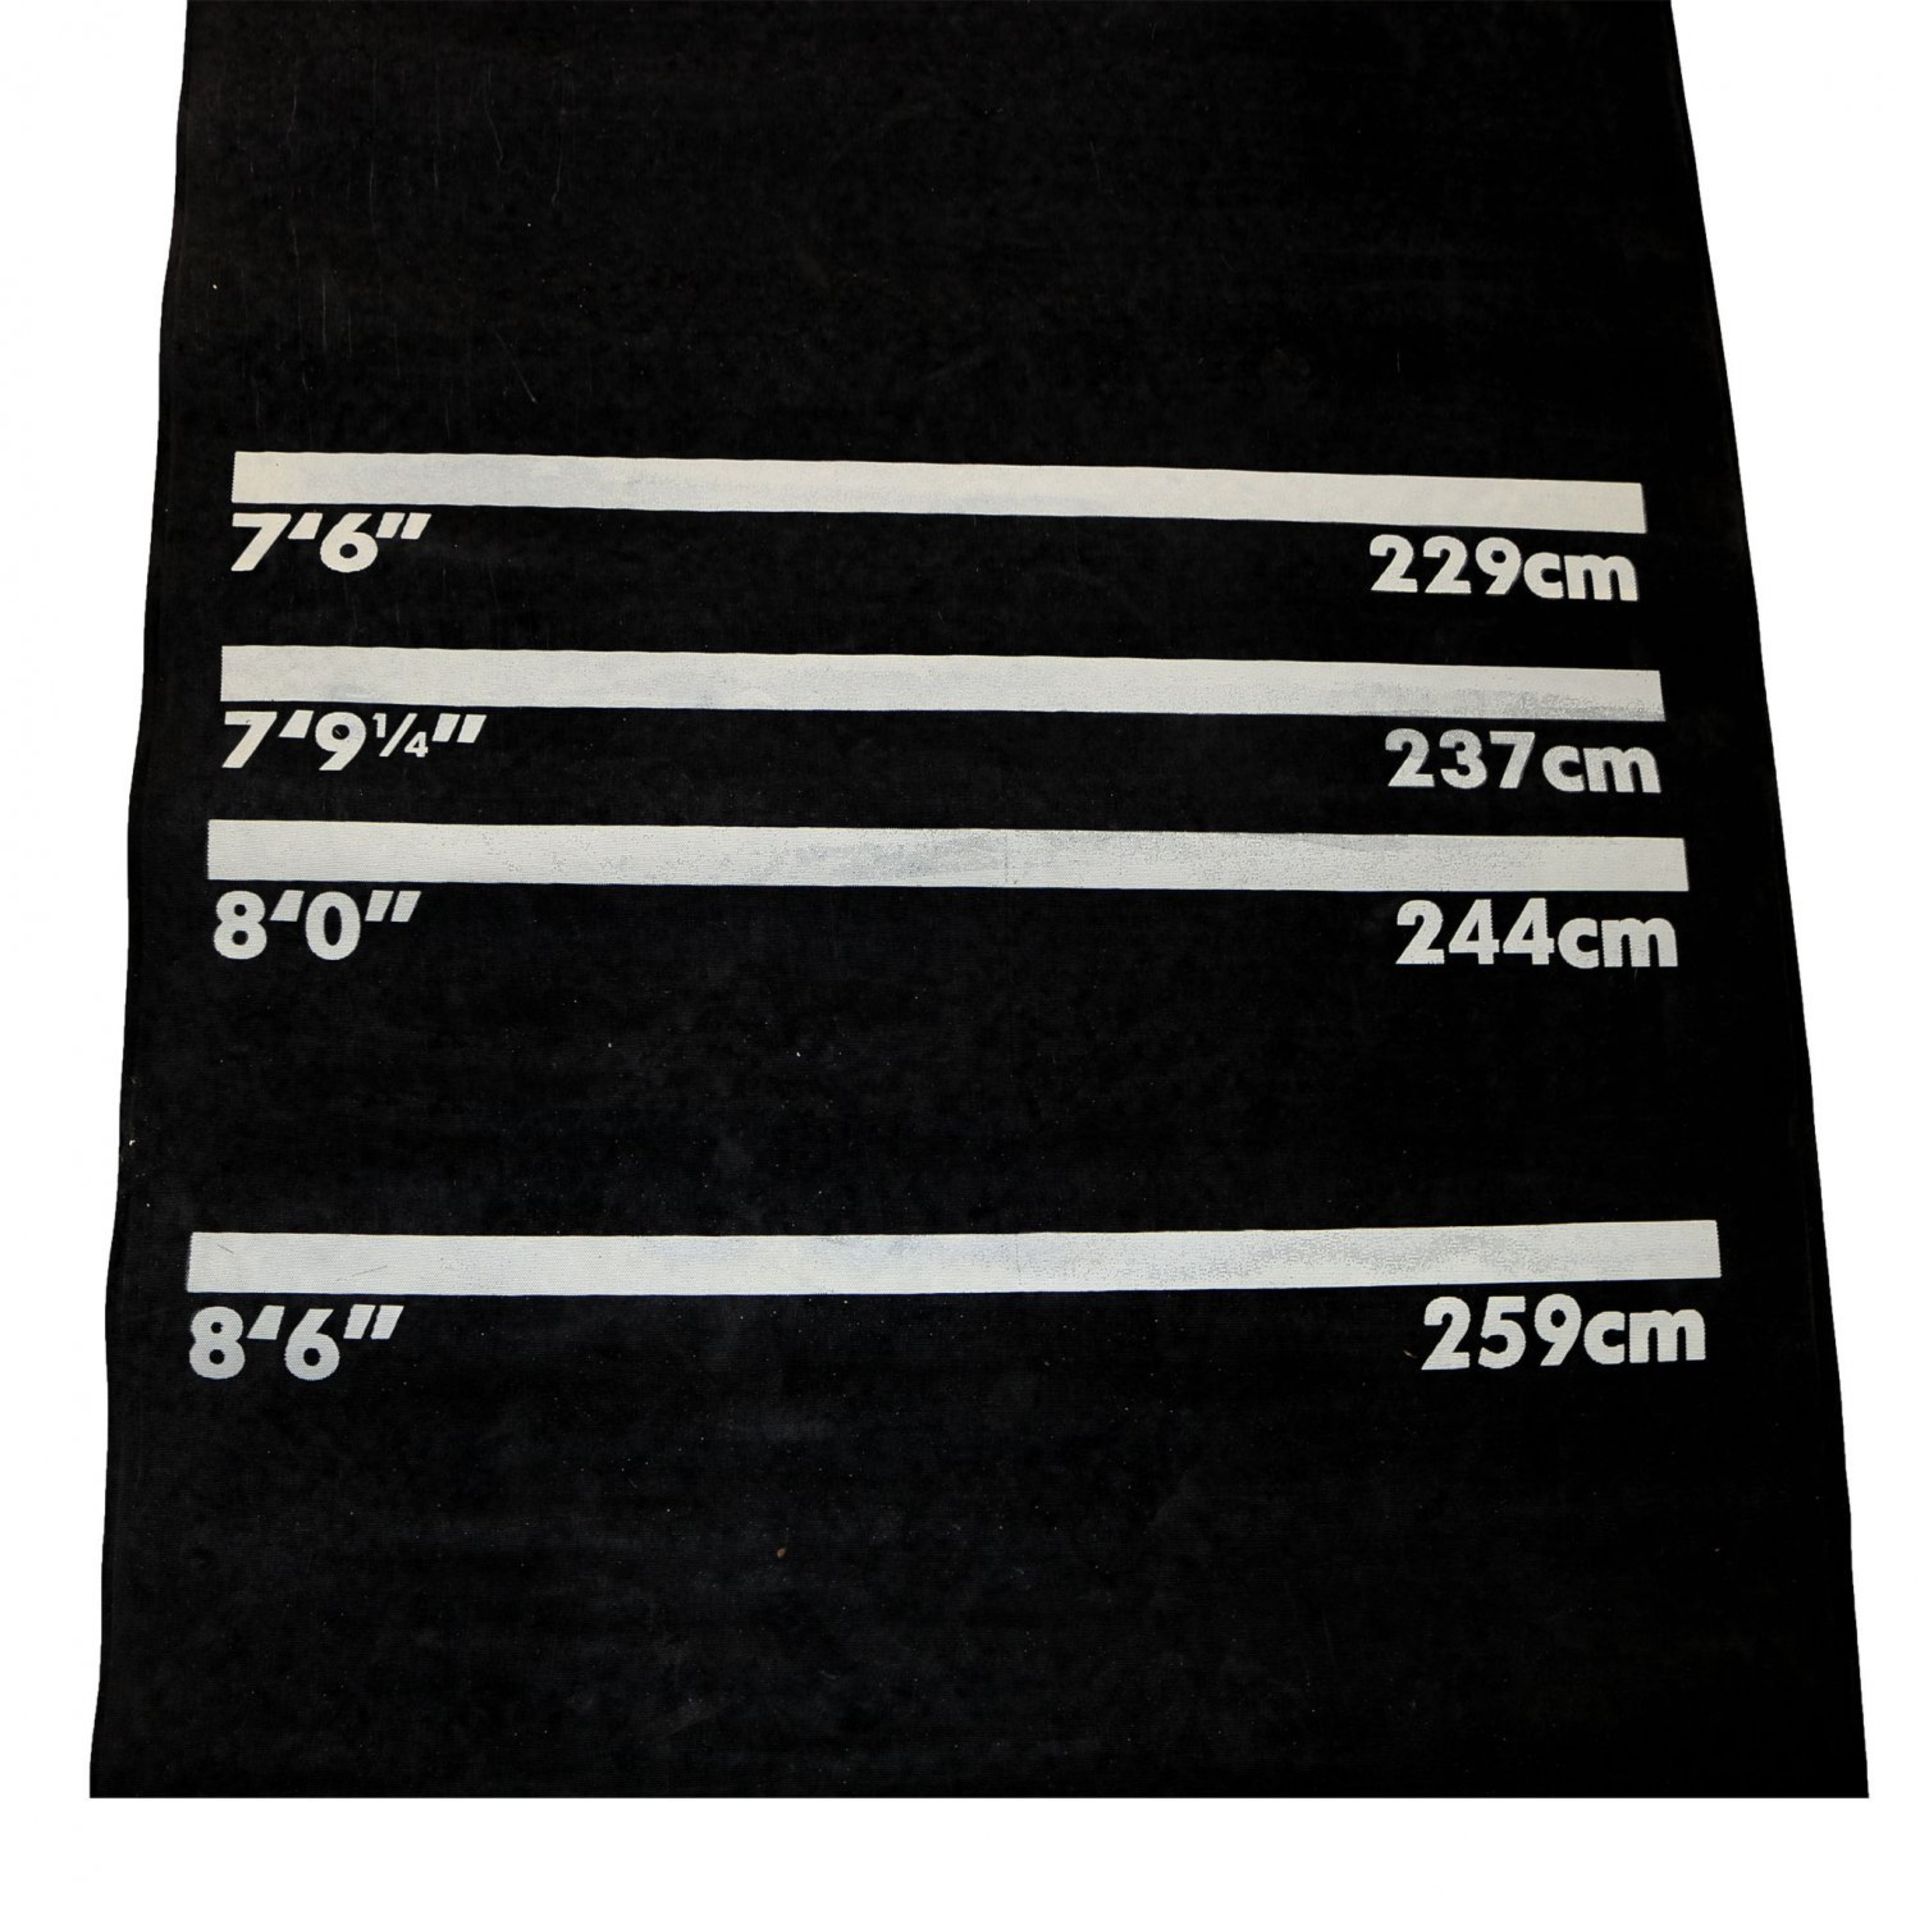 (EE487) Professional Rubber Darts Mat Our Darts Rubber Mat comes with 4 standard measur... - Image 2 of 2